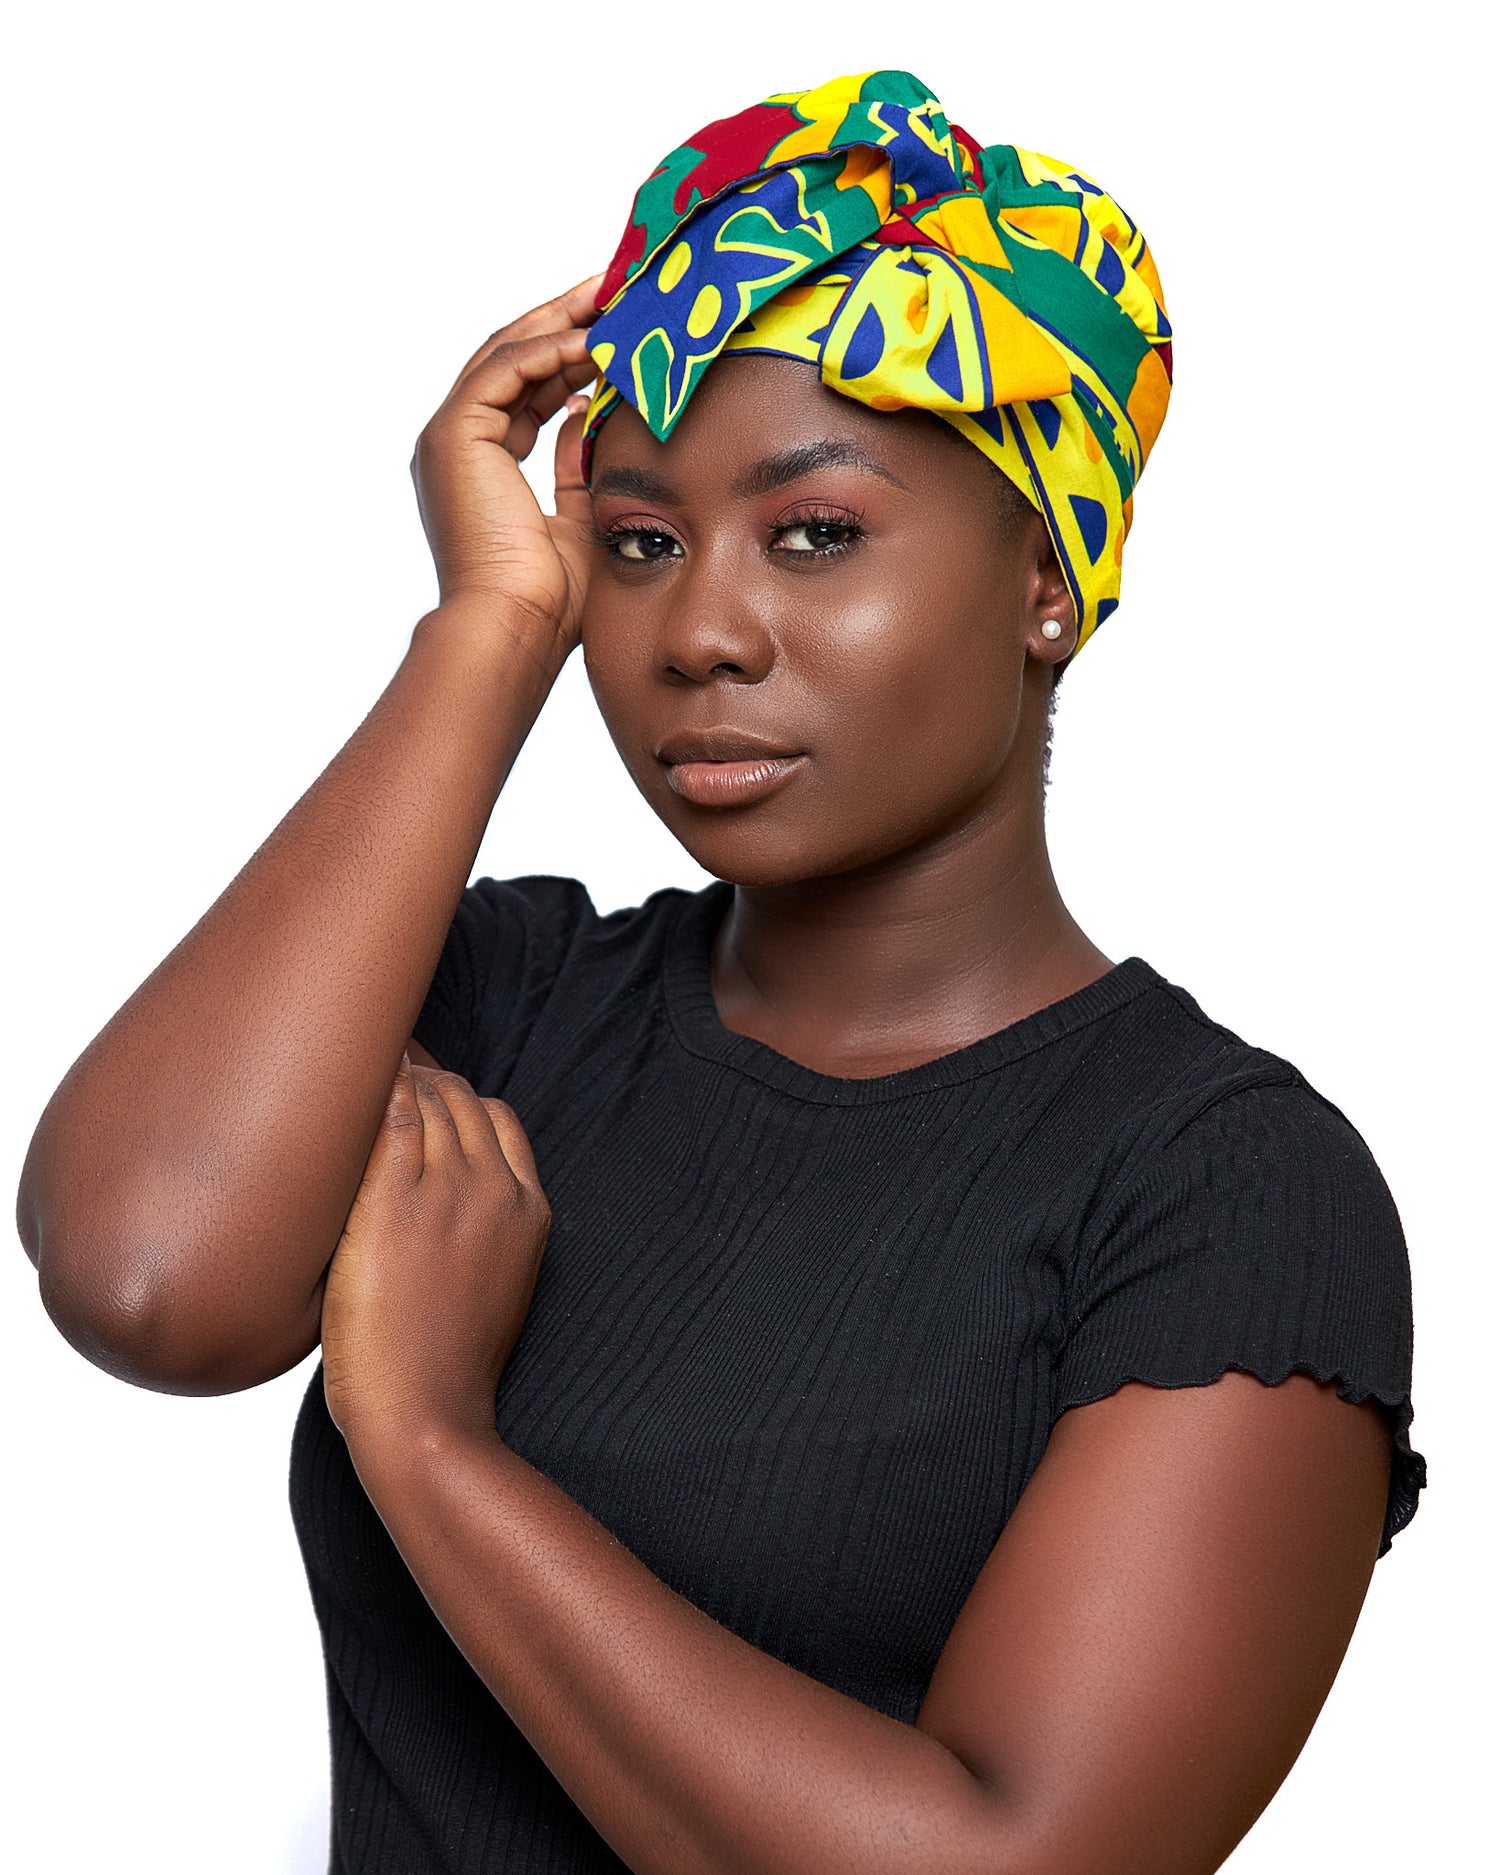 Ghanaian Kente Wax Print Made of Yellow,Gold, Red,Green And  Blue Blend of Beautiful Colours And Pattern With Adinkira Symbols, Hand Made Elastic Silklined Bonnet With Band